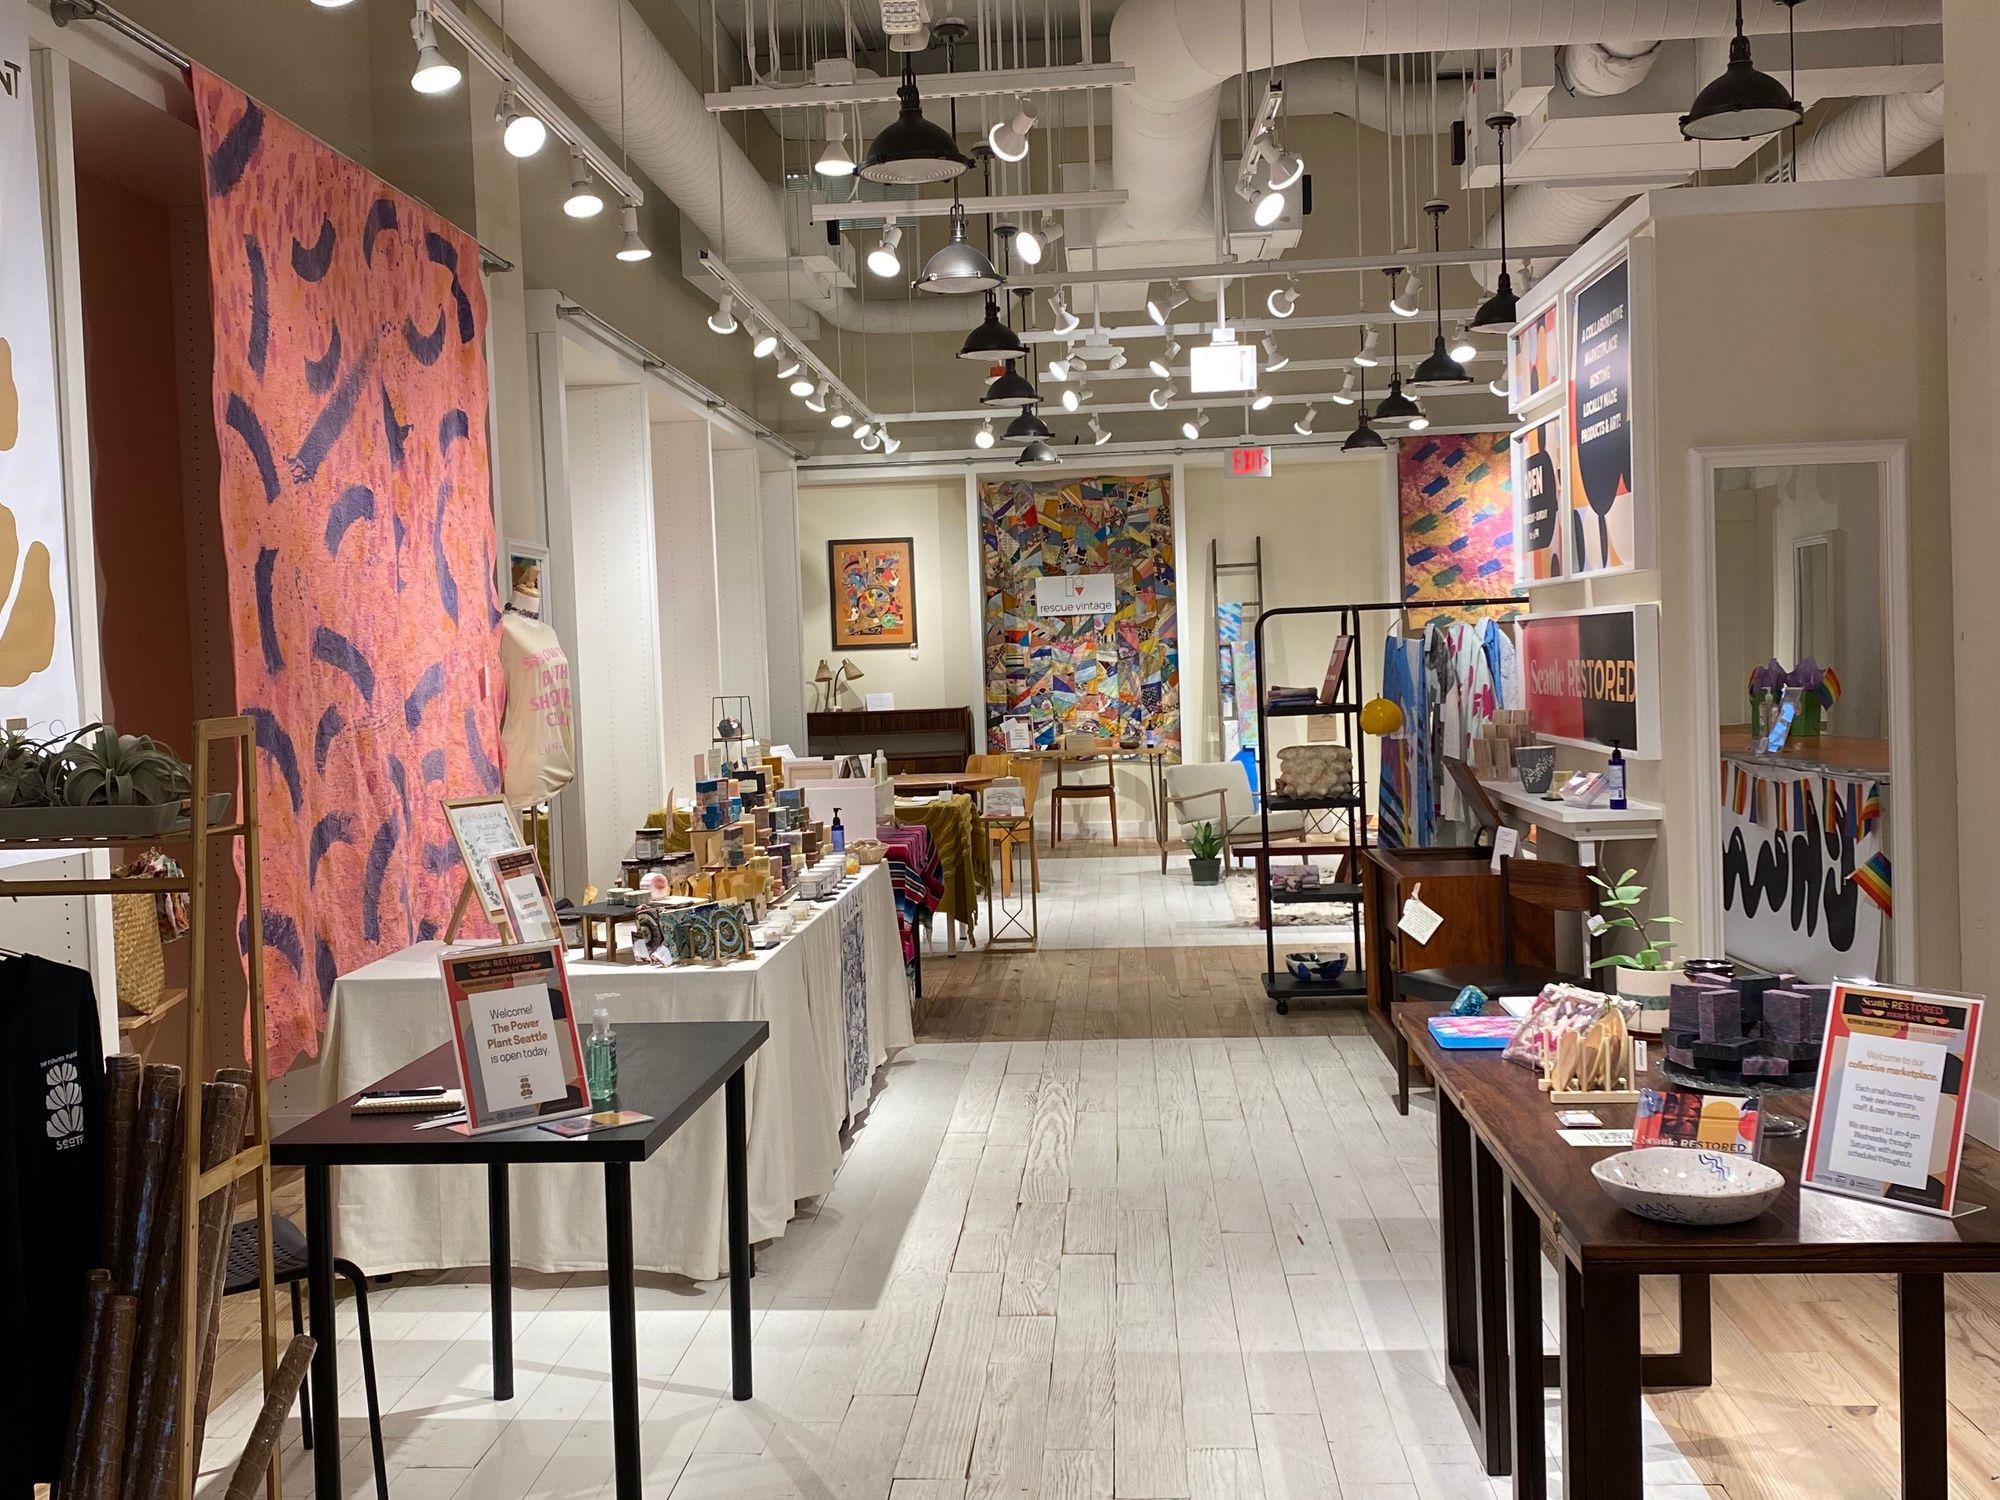 A view of tables laden with goods and art hanging on walls inside a store.